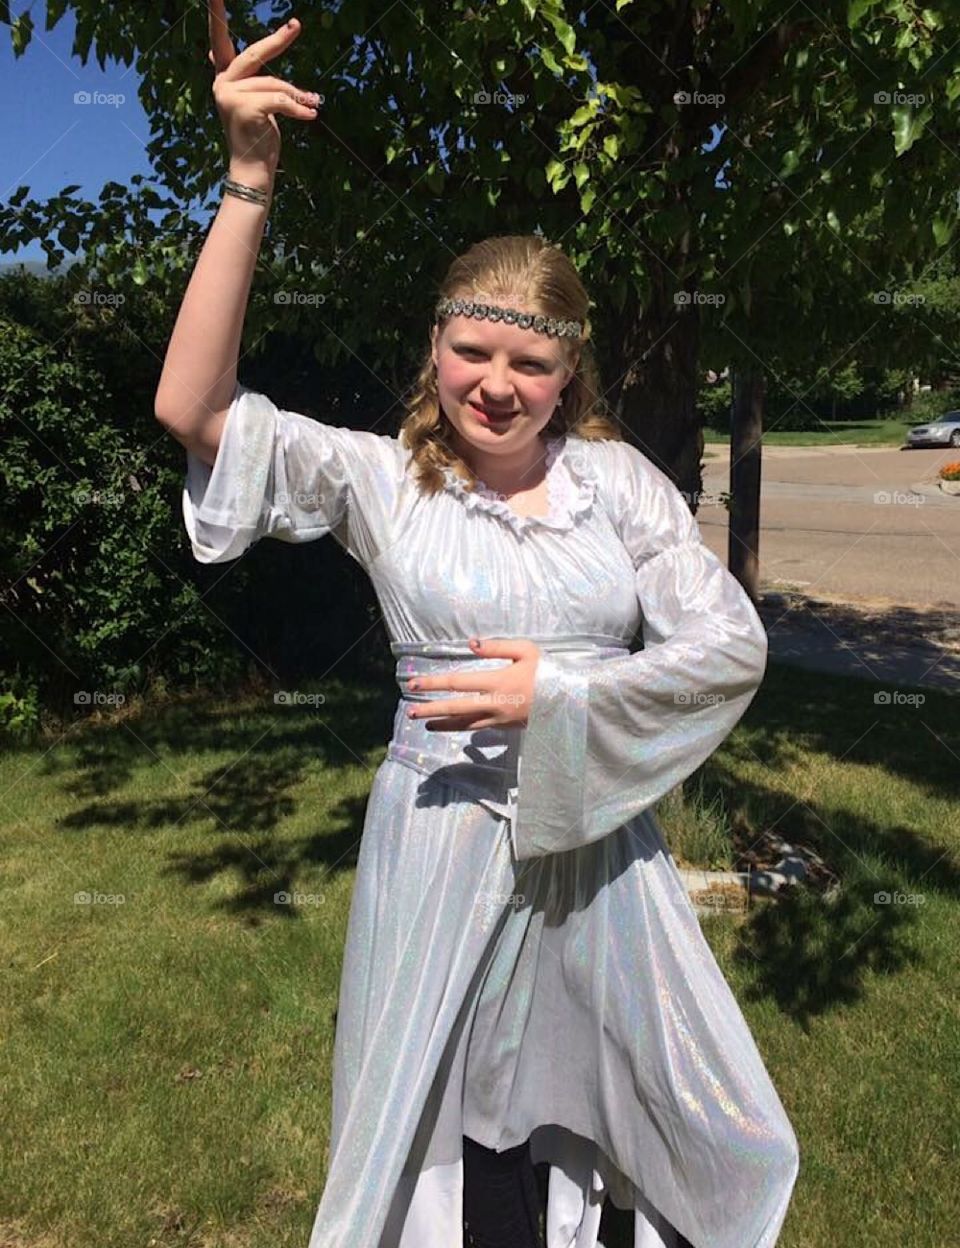 Posing as usual, lil’ poser in her silver fountain costume for summer theatre.